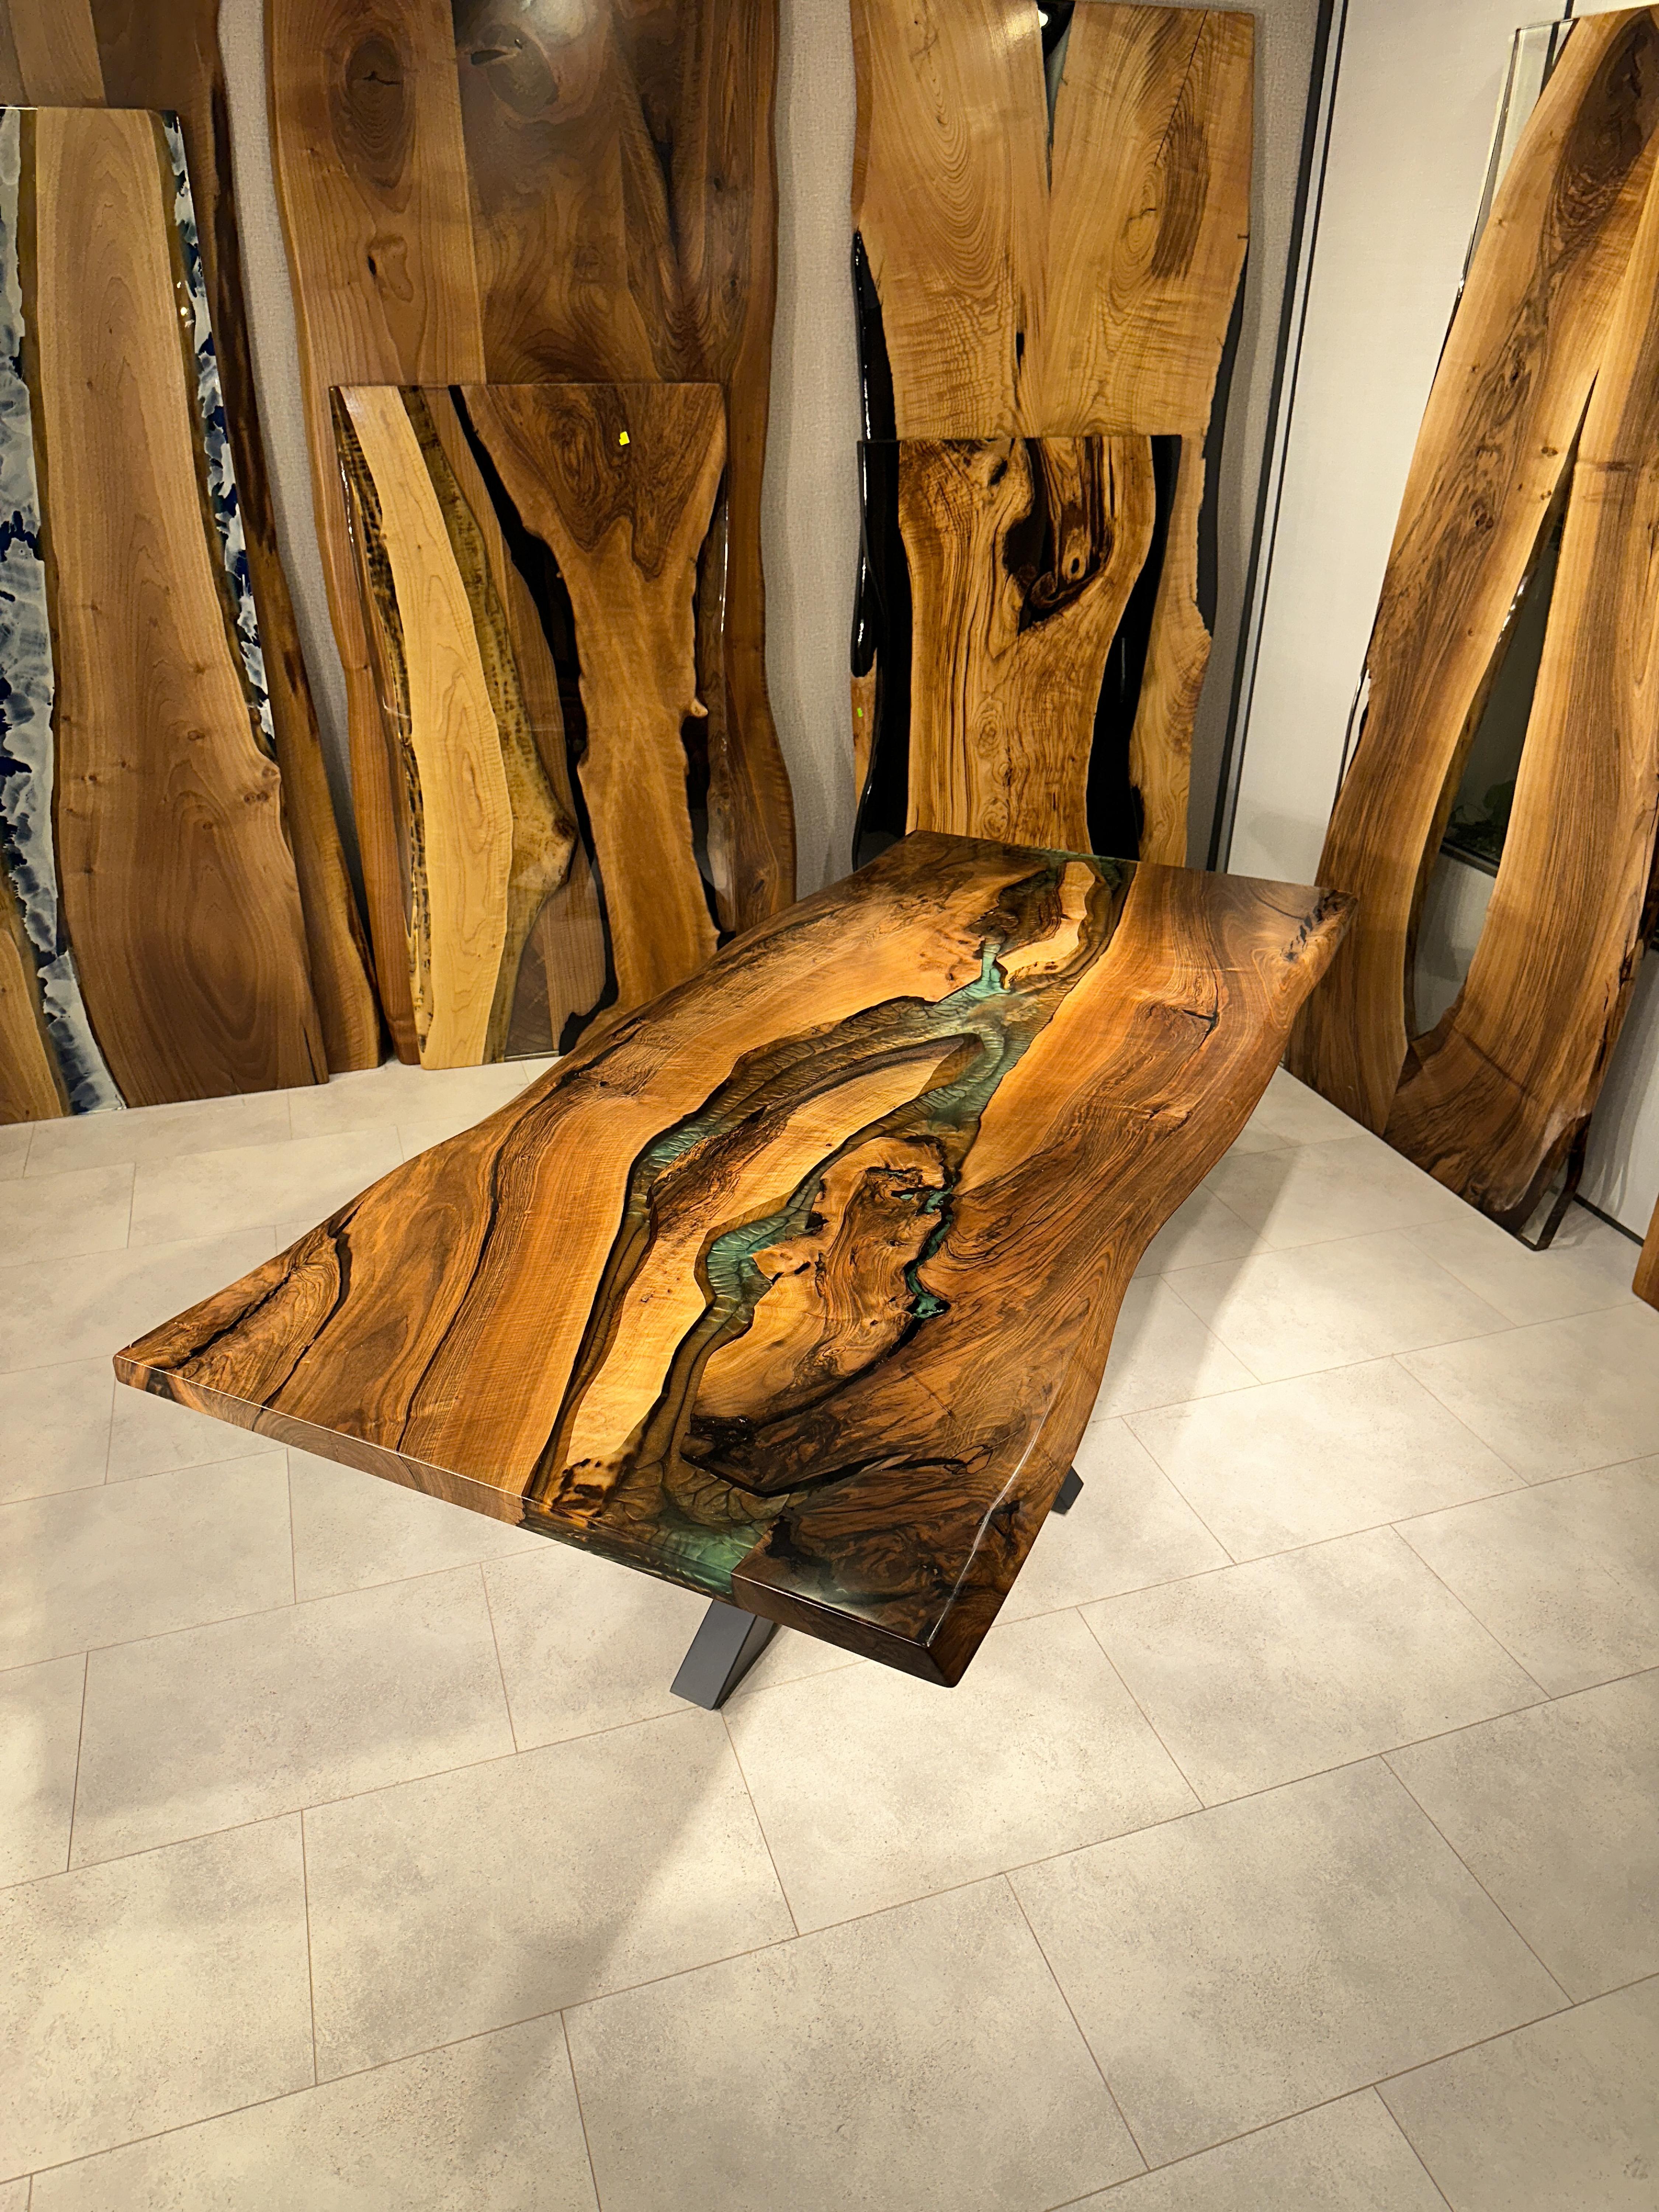 WALNUT EPOXY RESIN DINING TABLE

This epoxy table emerges as a unique work of art, inspired by nature's beauty. 

The epoxy table stands out not only for its design but also its durability. Thanks to its epoxy coating, it is highly resistant to